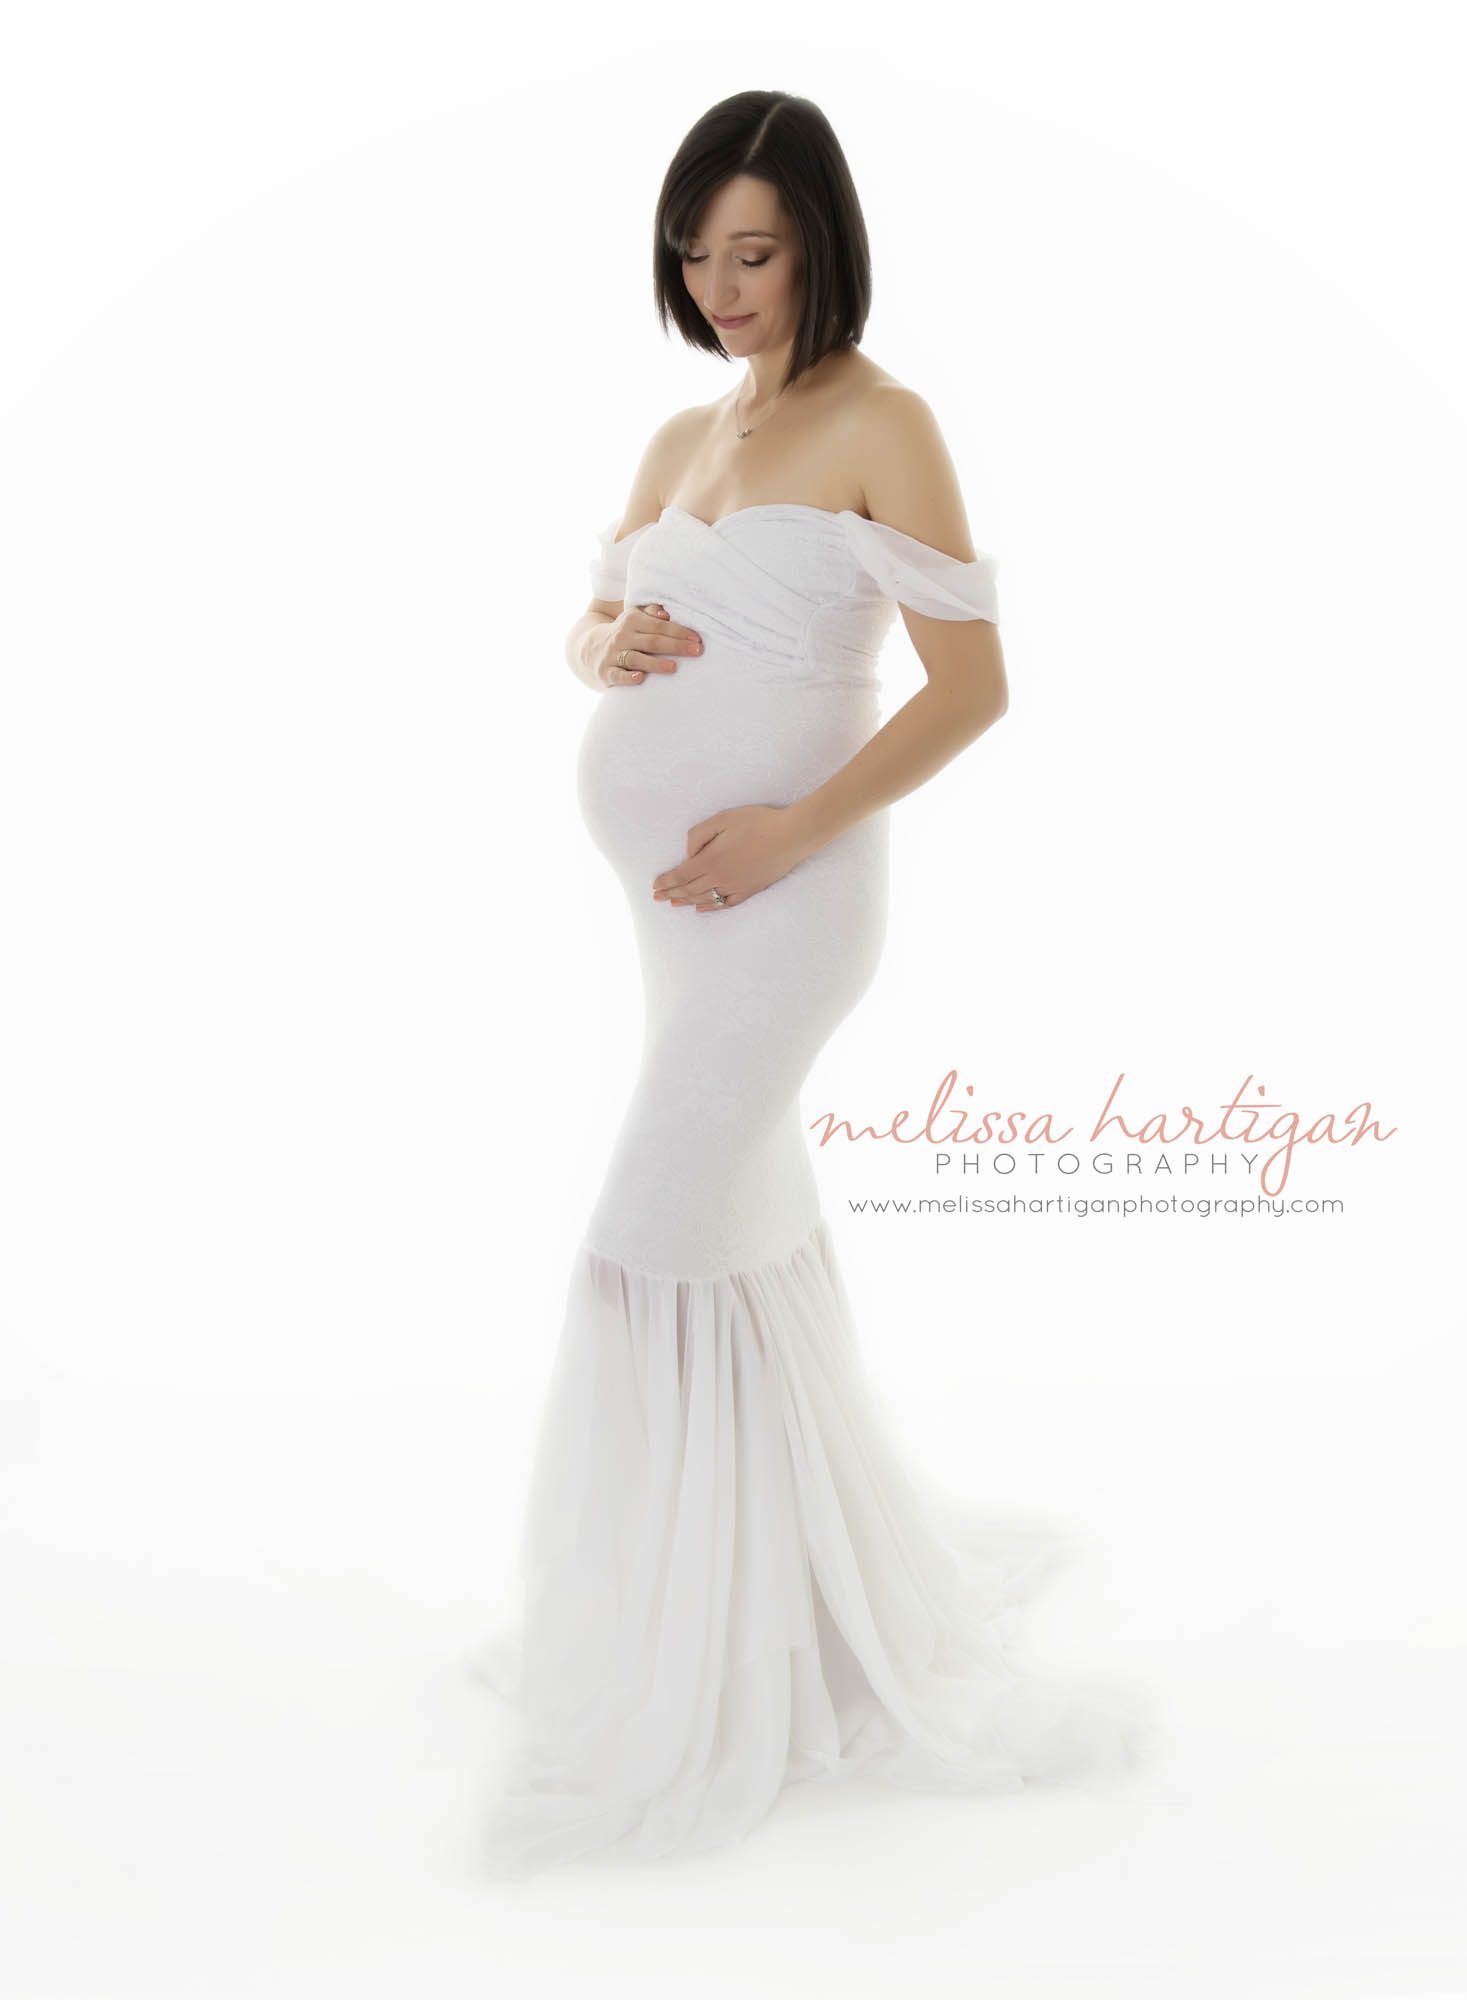 Pregnant mom standing pose in white dress CT Maternity Photographer